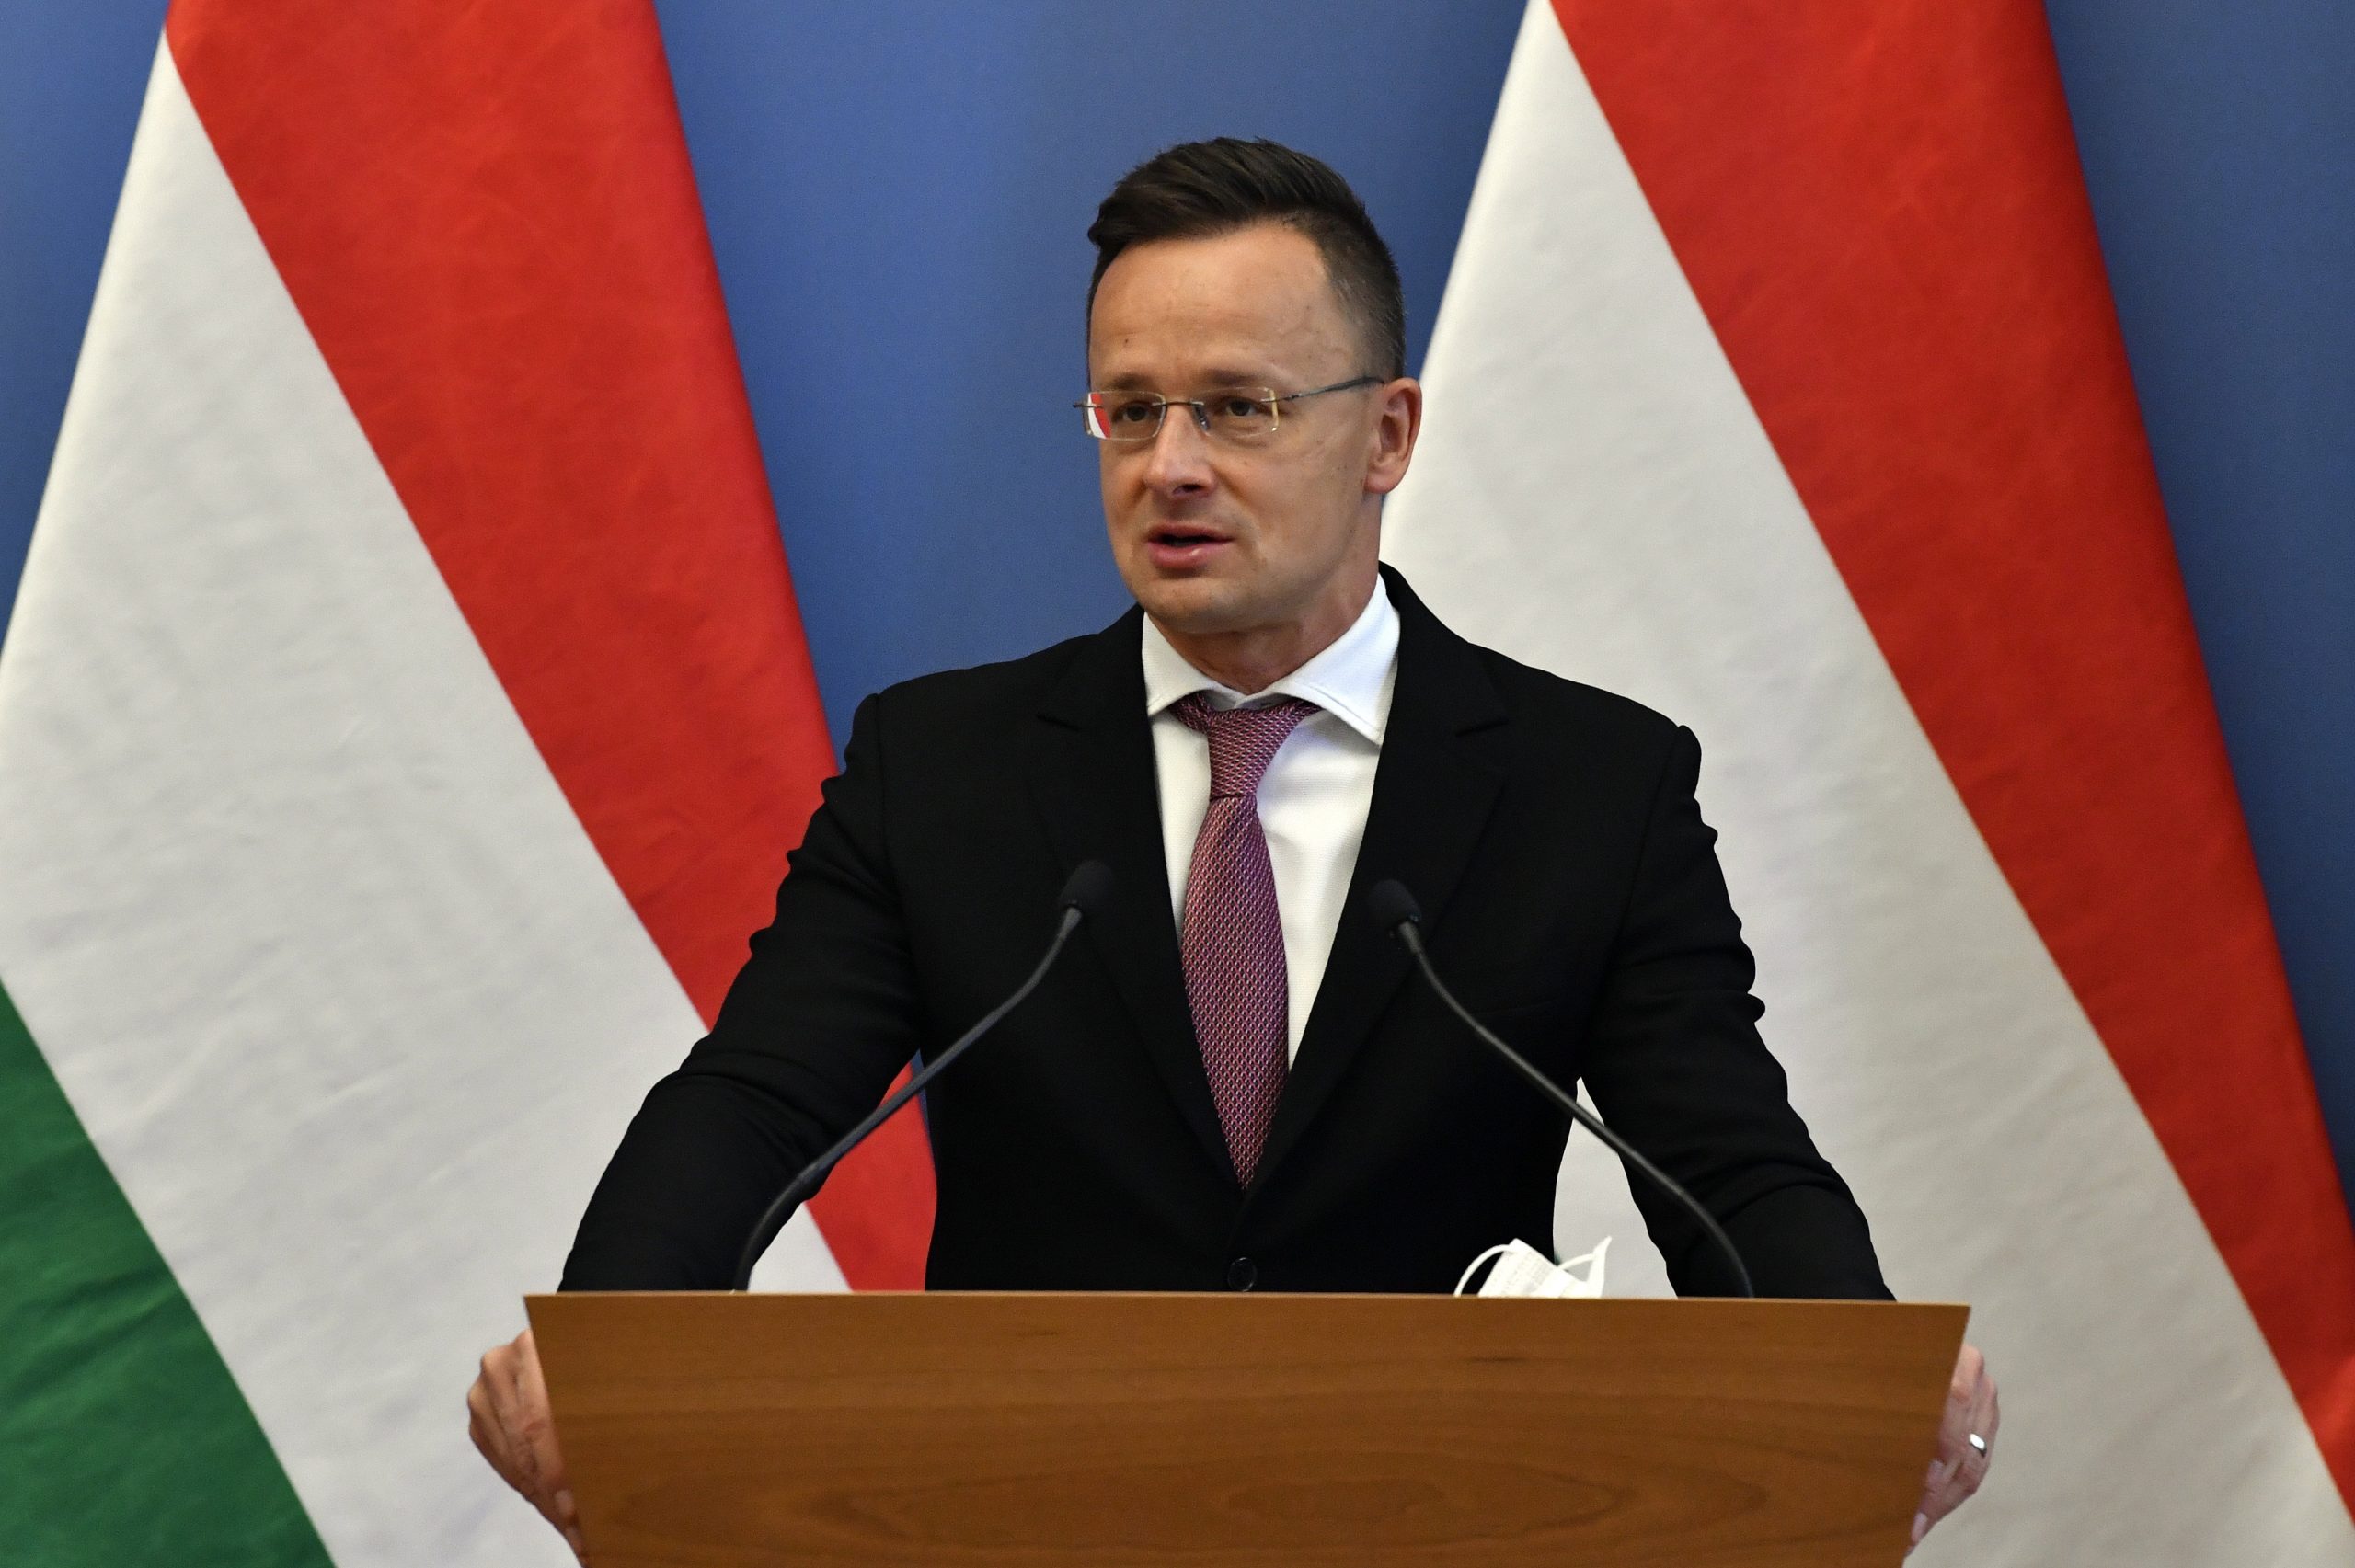 FM Szijjártó: Education in the mother tongue must be guaranteed for all Hungarians in the Carpathian Basin